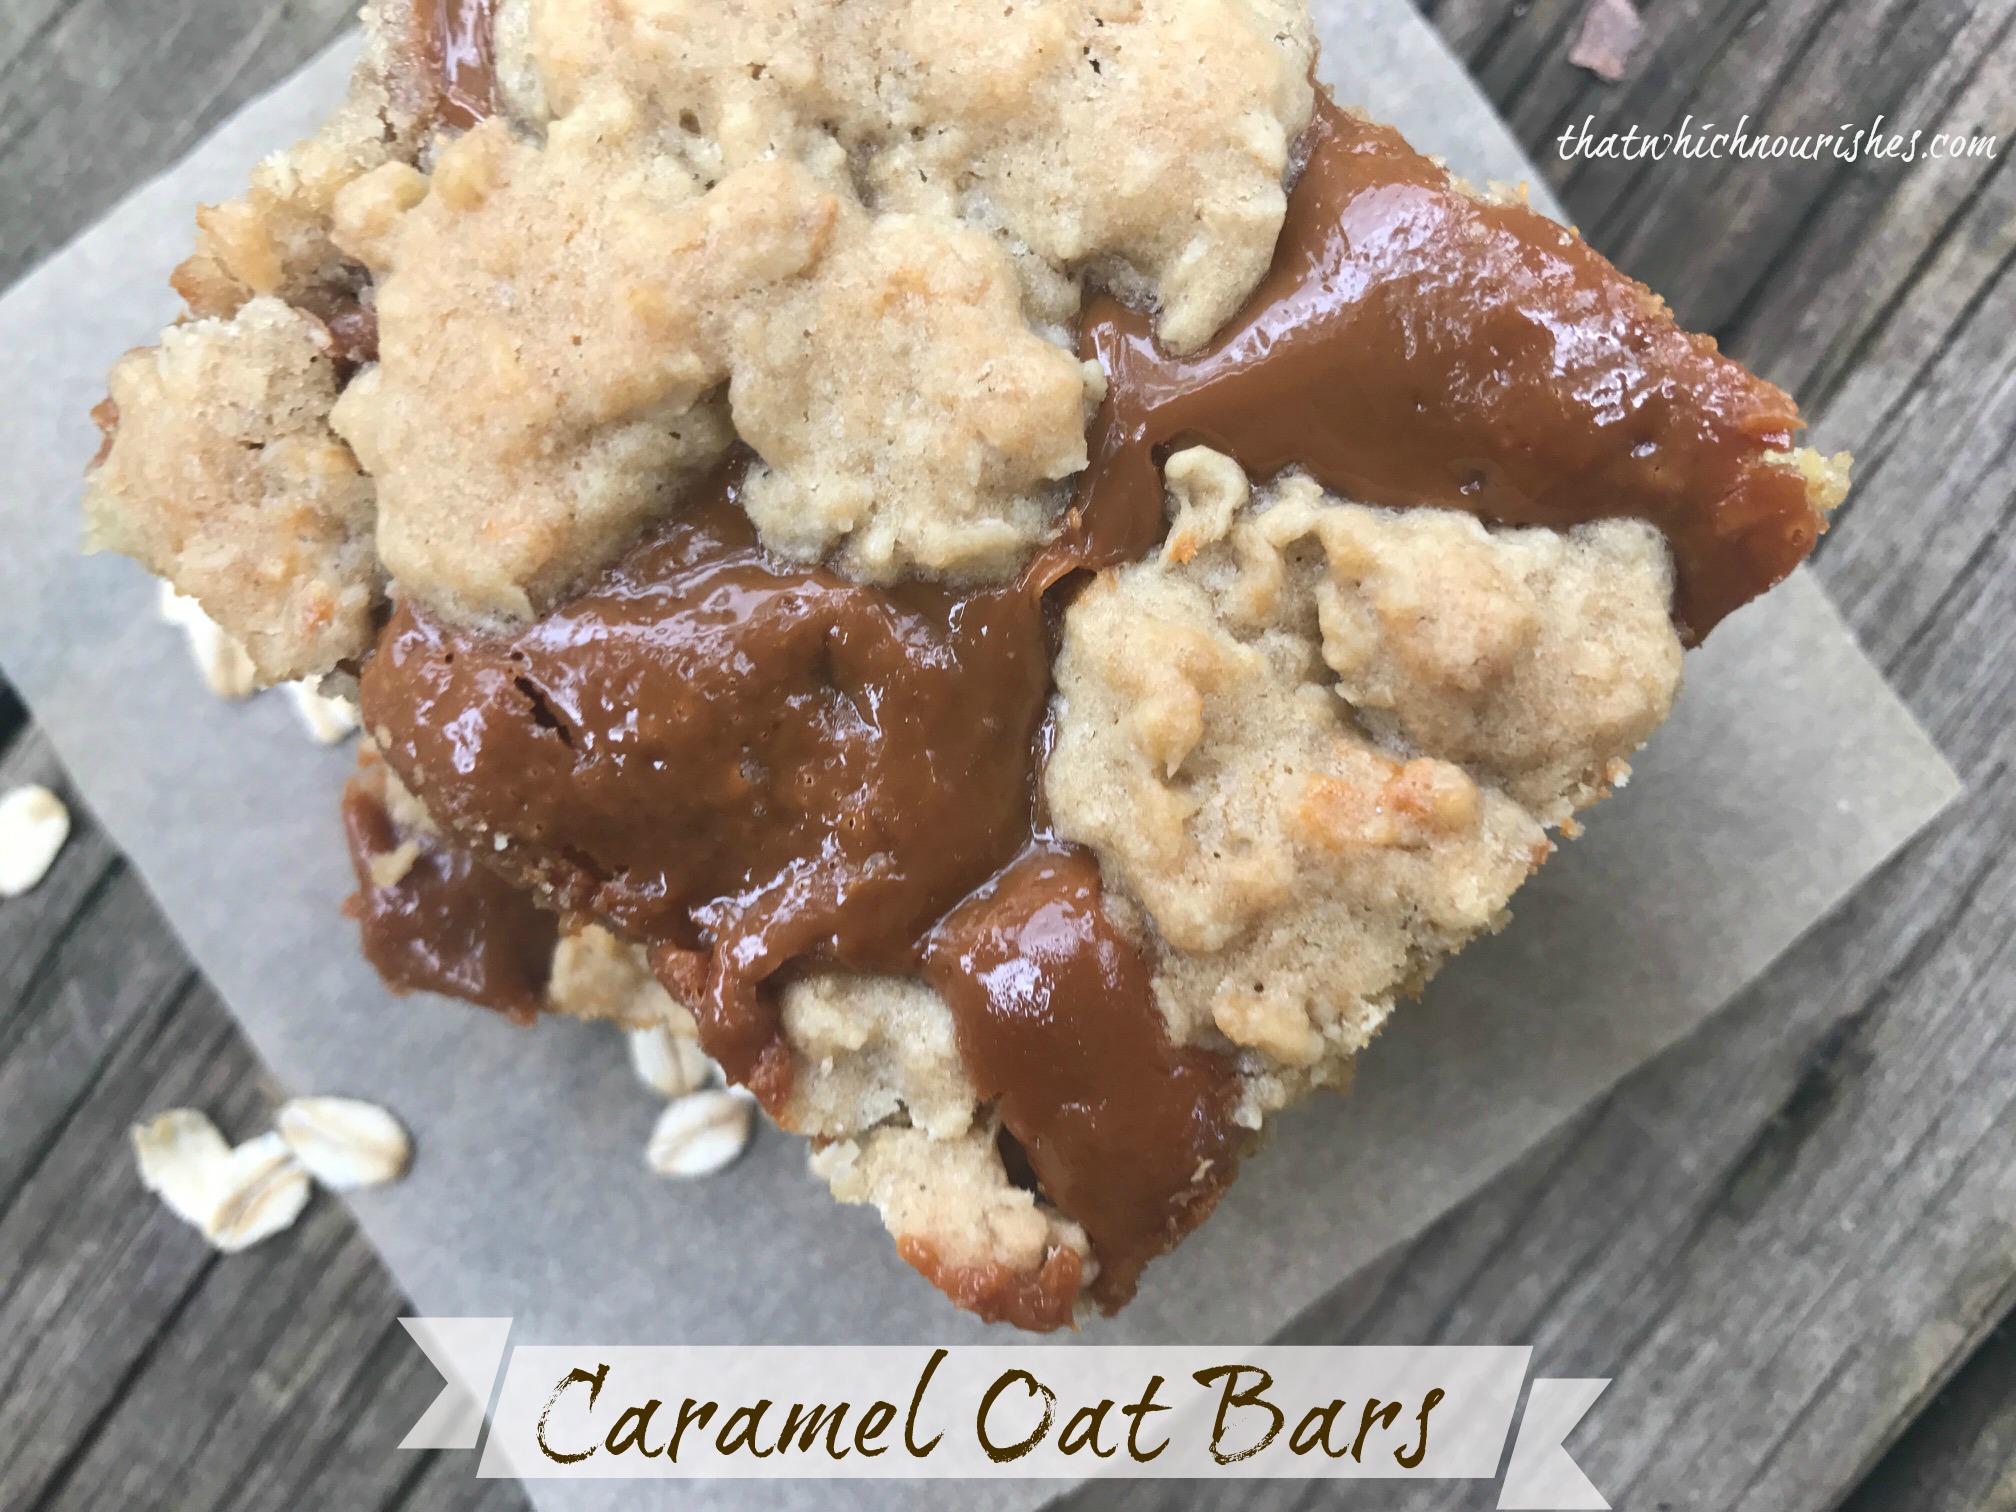 Caramel Oat Bars -- Chewy oatmeal bars are blanketed in a decadent layer of dulce de leche caramel making a rich and delicious dessert that serves a large group. | thatwhichnourishes.com